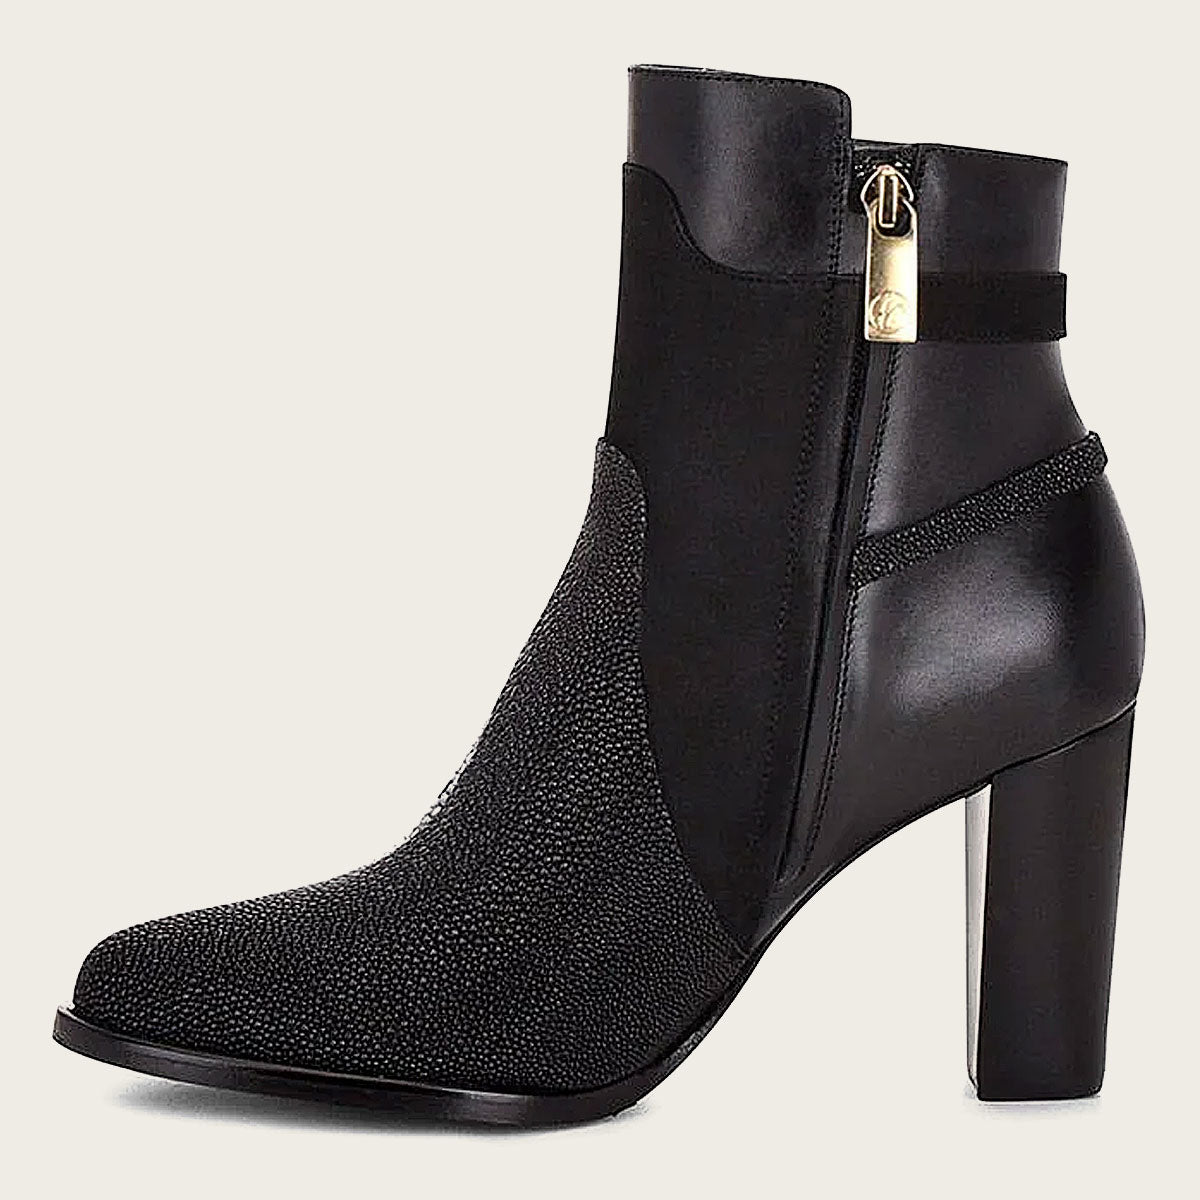 Black ankle boots in genuine stingray leather